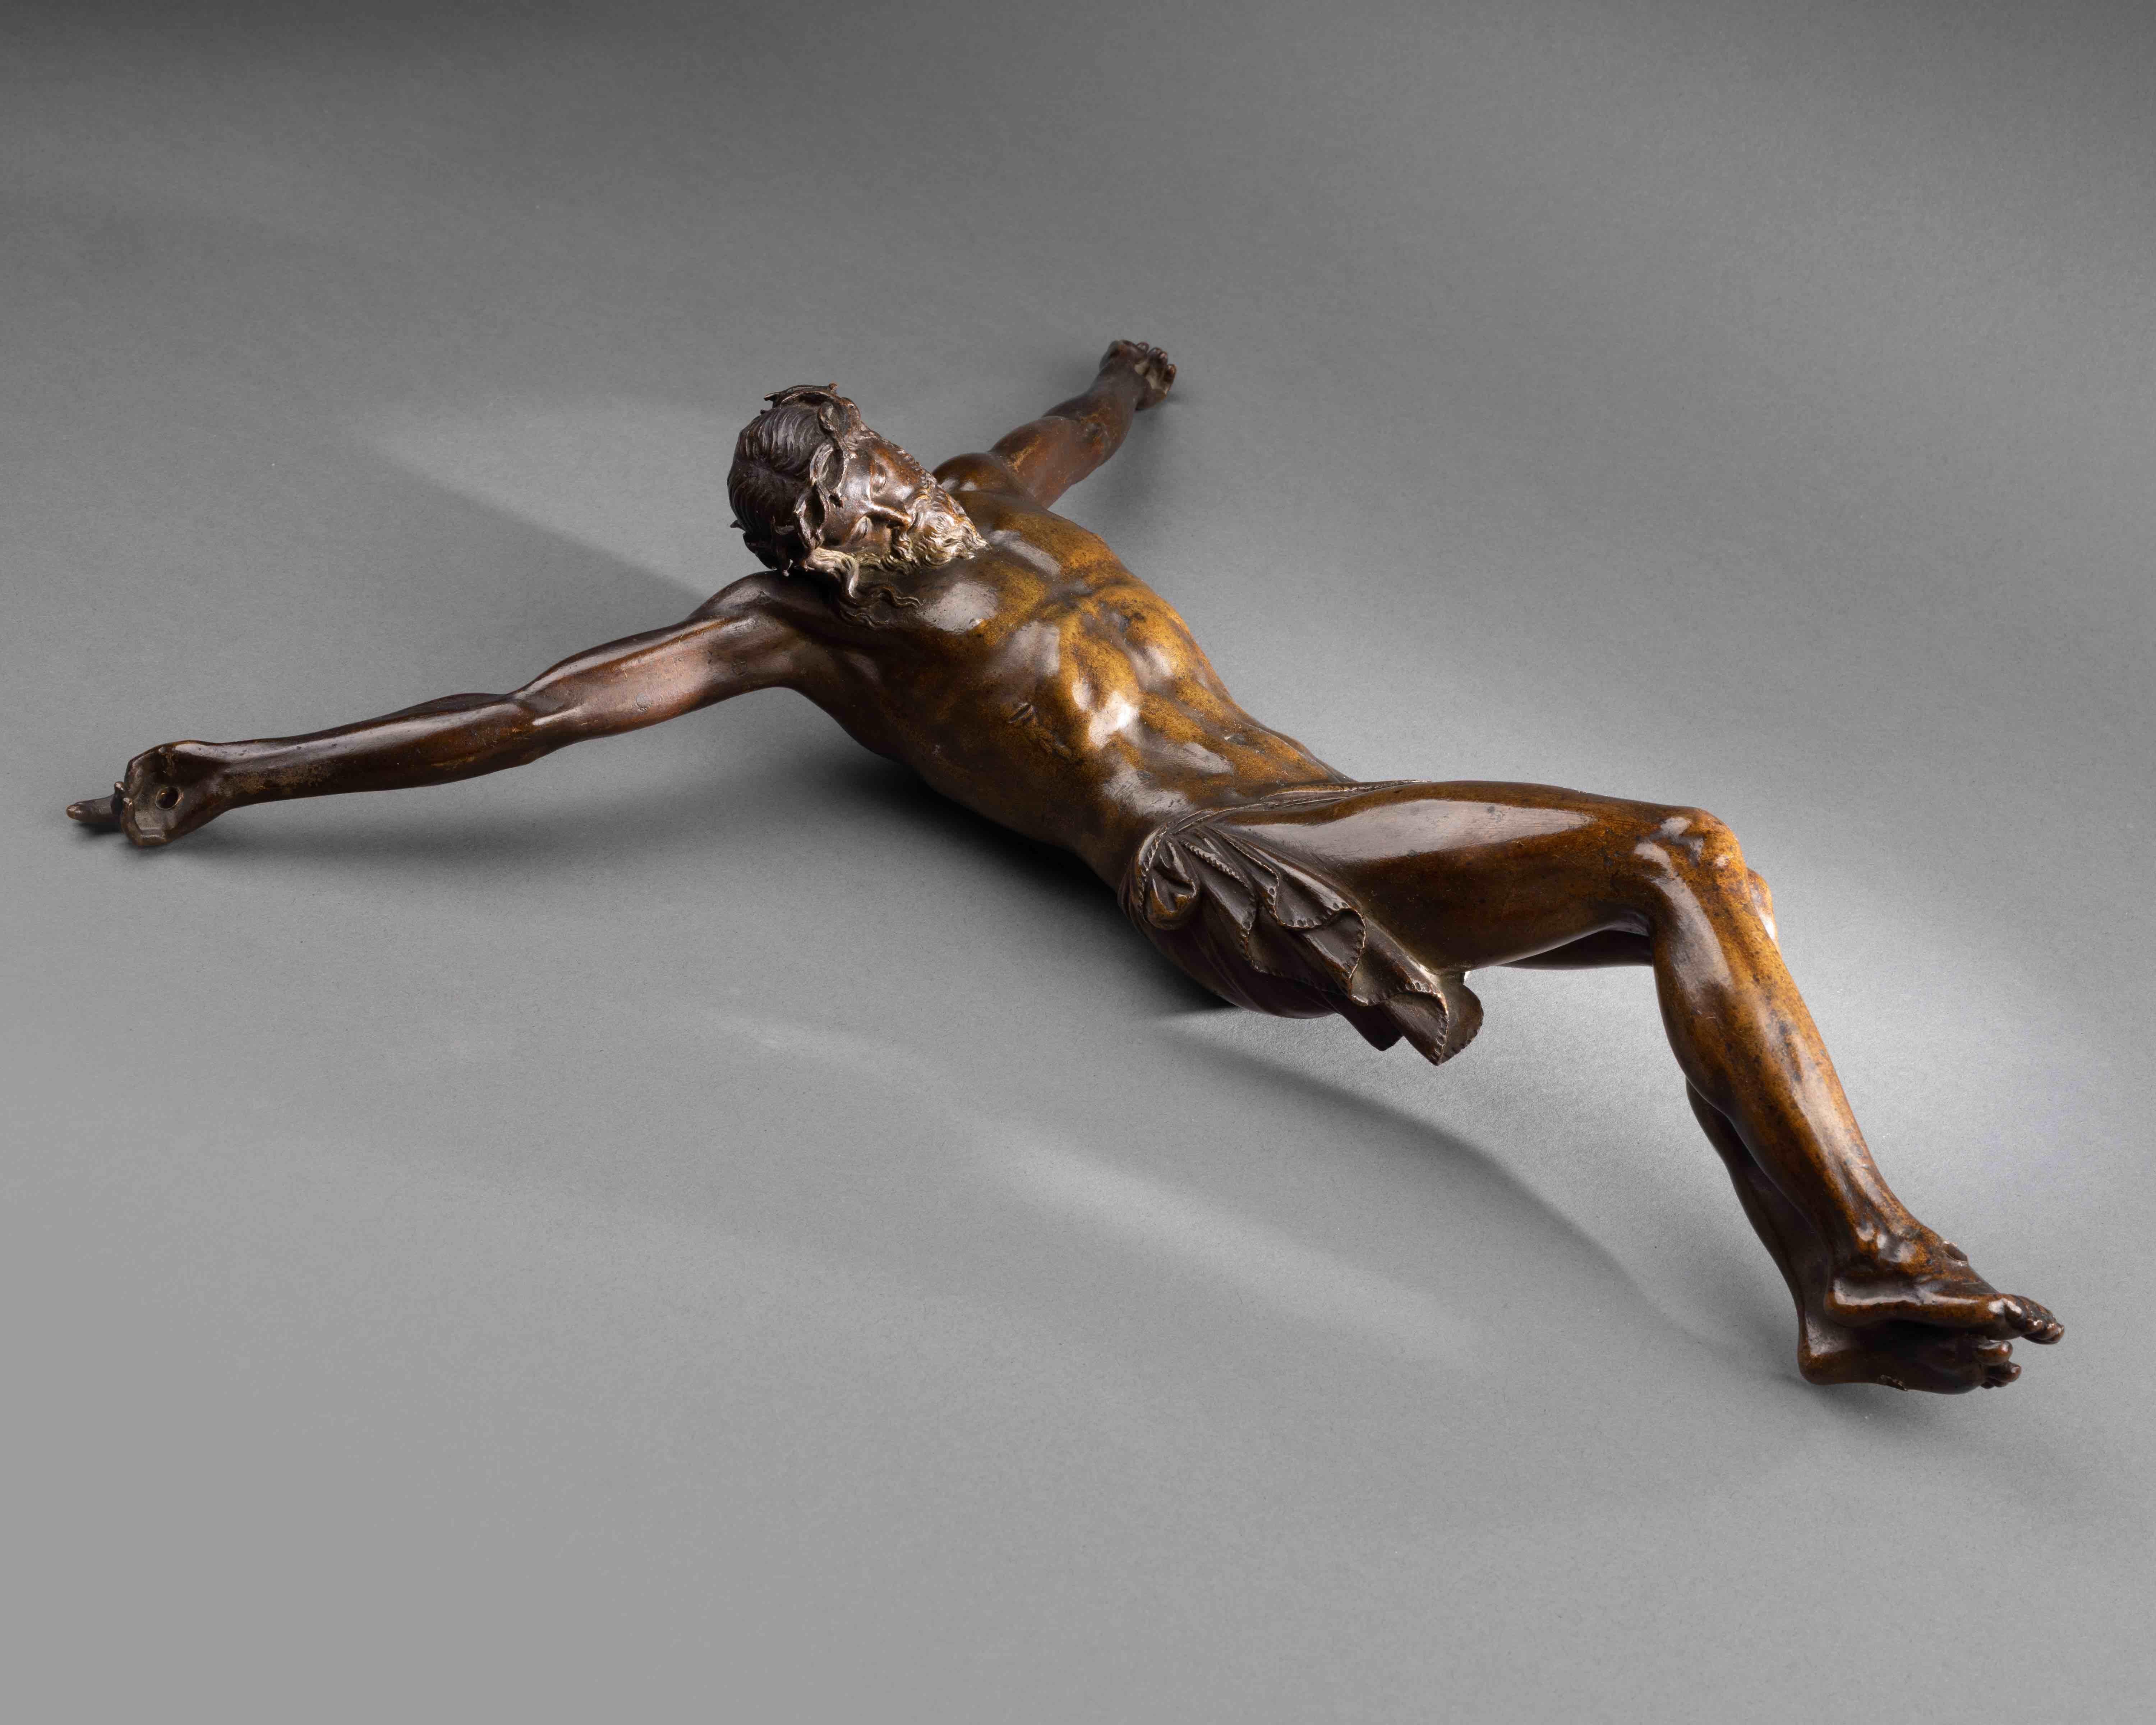 Guglielmo della Porta workshop
Christ crucified 
Rome, 1570-1575
Bronze, lost wax
39.5 x 35 cm

Beautiful patina

Figure representing Christ dead, with his head bowed to his right and fastened to the cross. The head totally fallen down onto